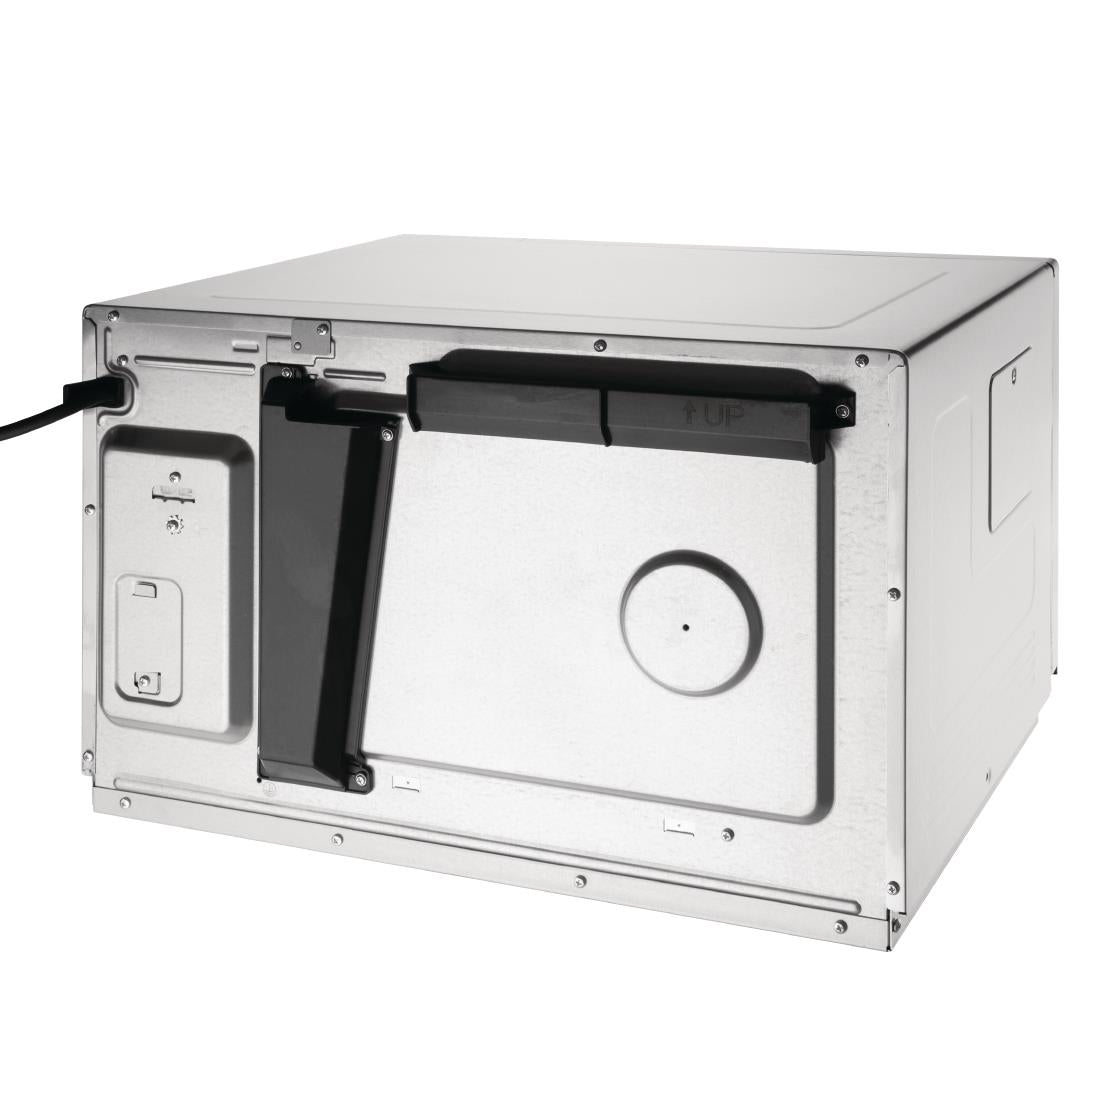 FB863 Buffalo Manual Commercial Microwave Oven 34ltr 1800W JD Catering Equipment Solutions Ltd